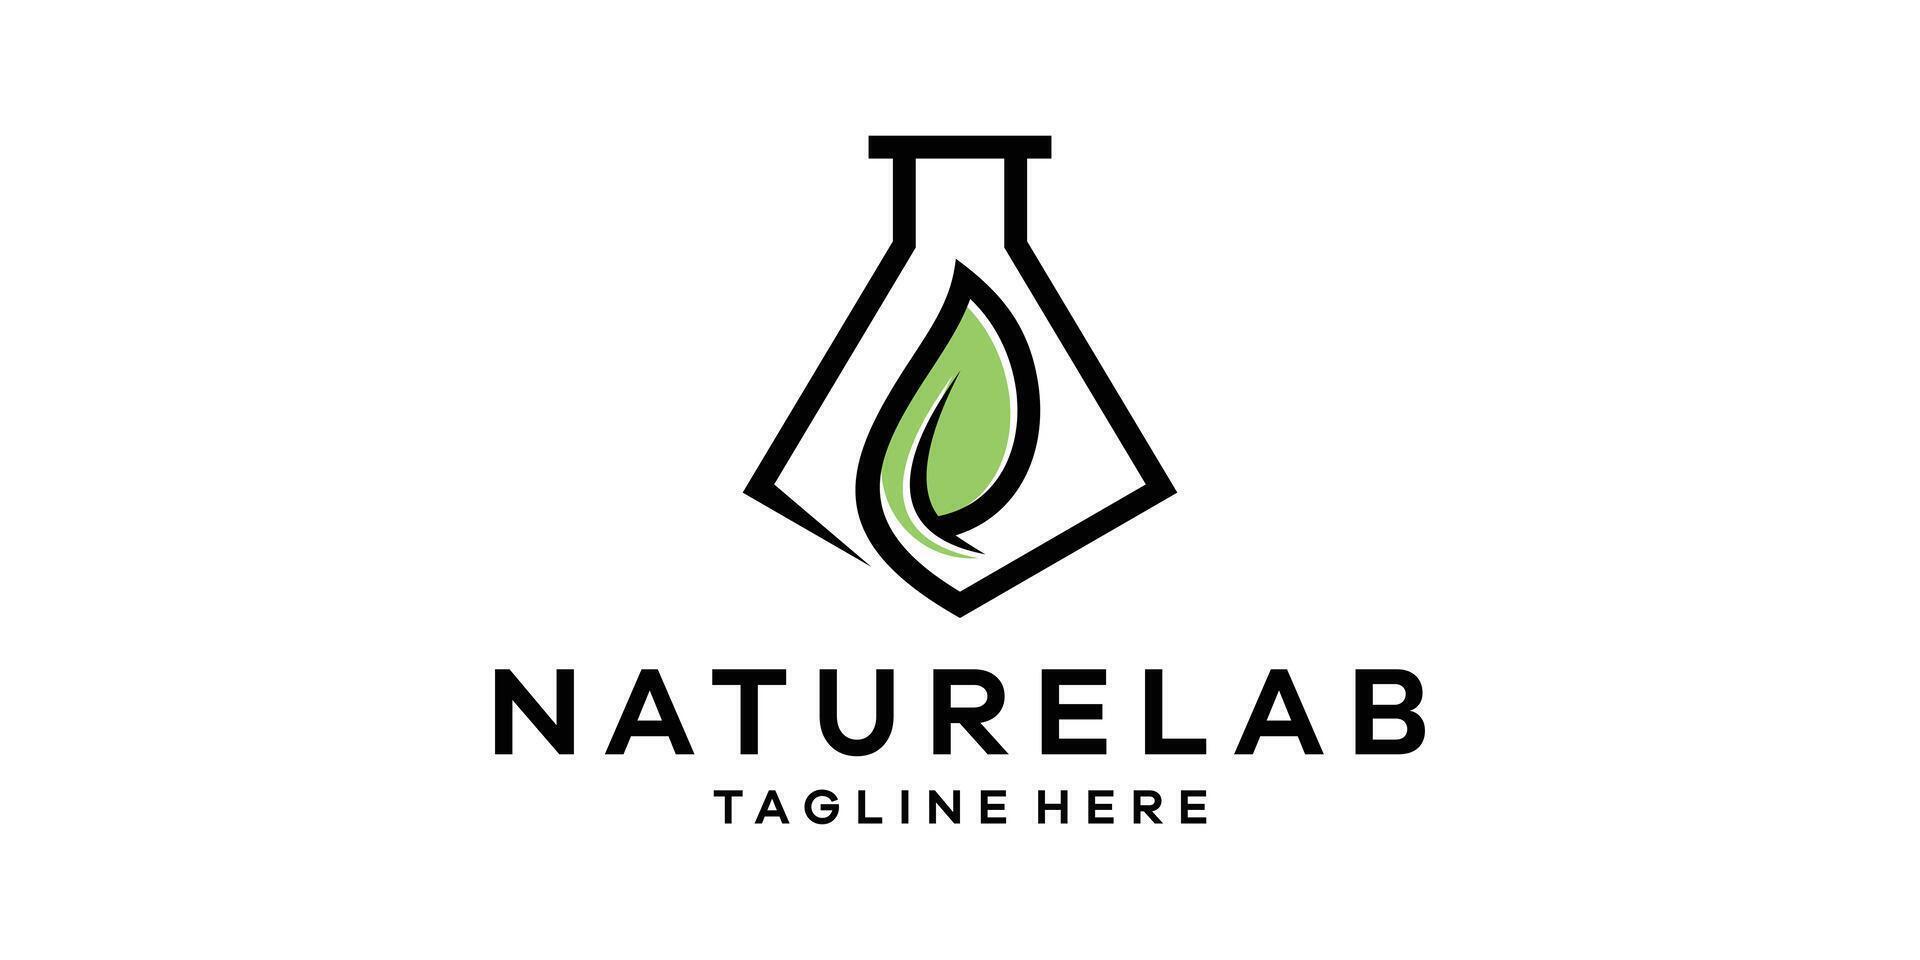 logo design combining the shape of a lab glass with leaves, logo design nature lab. vector